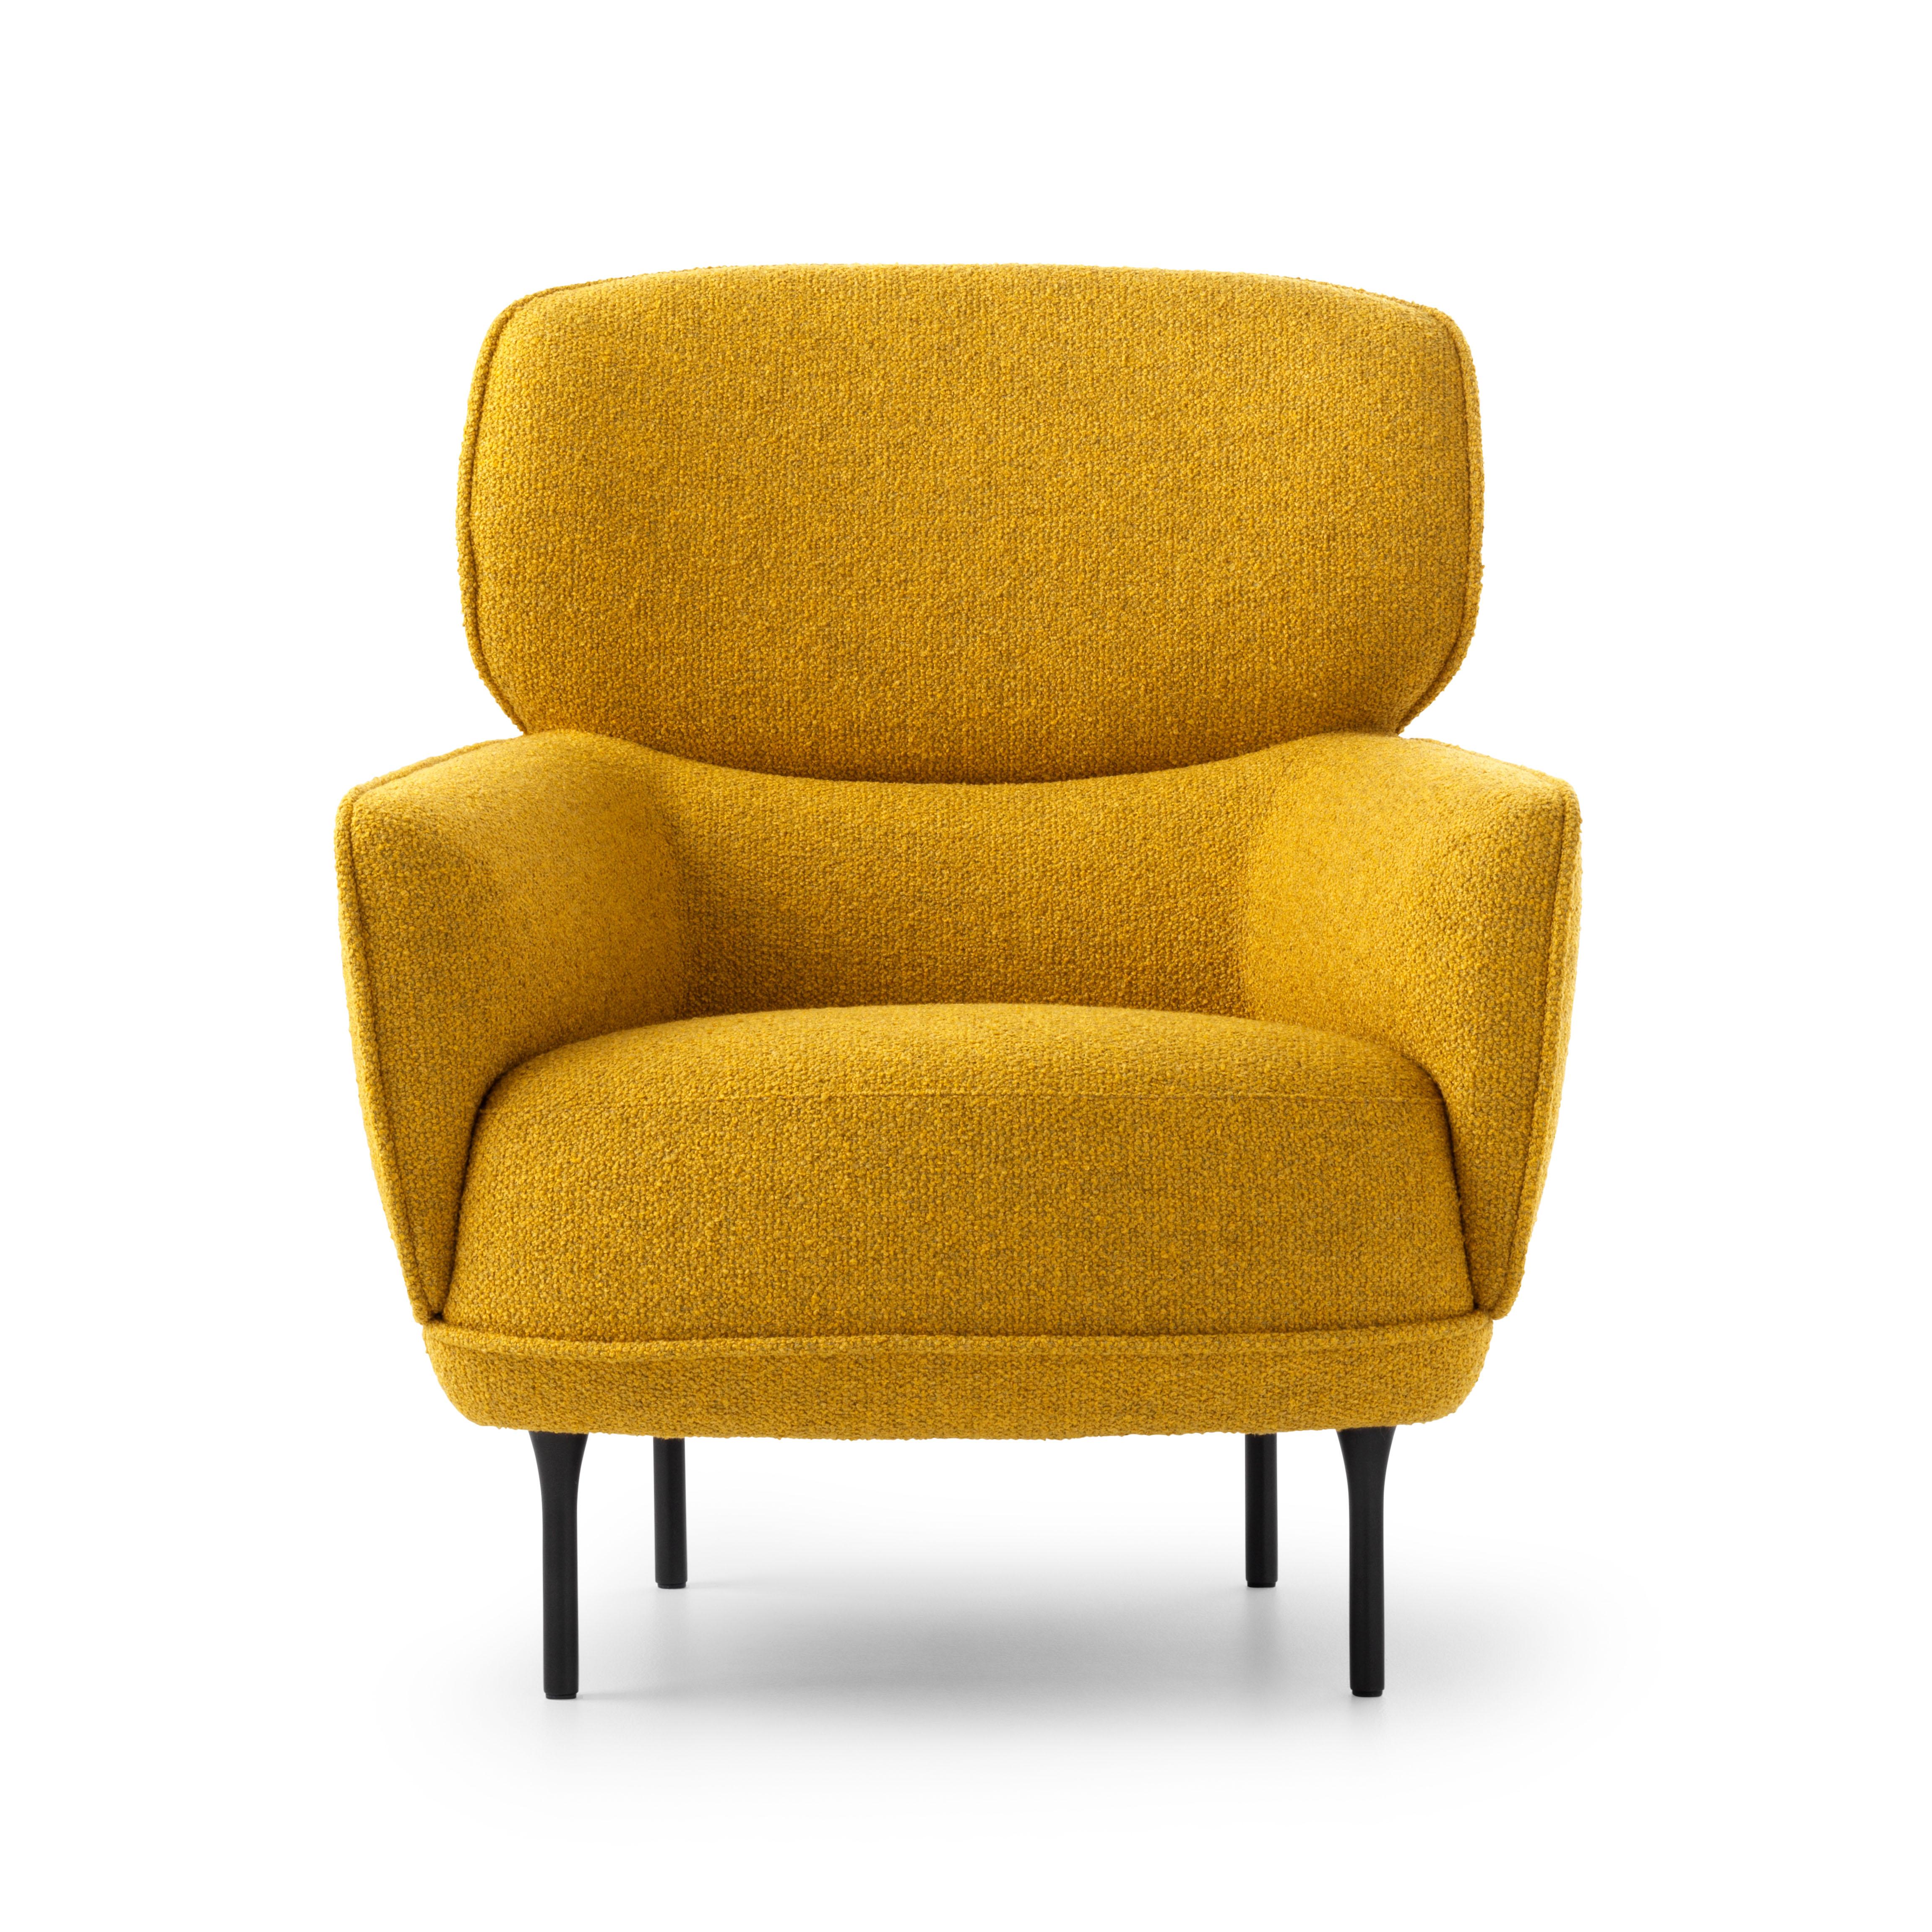 LXR07 by Leolux is the result of our first collaboration with the Spanish designer studio Yonoh. It represents Spanish design without any unnecessary frills. This comfortable and inviting armchair is a classic example of their characteristic